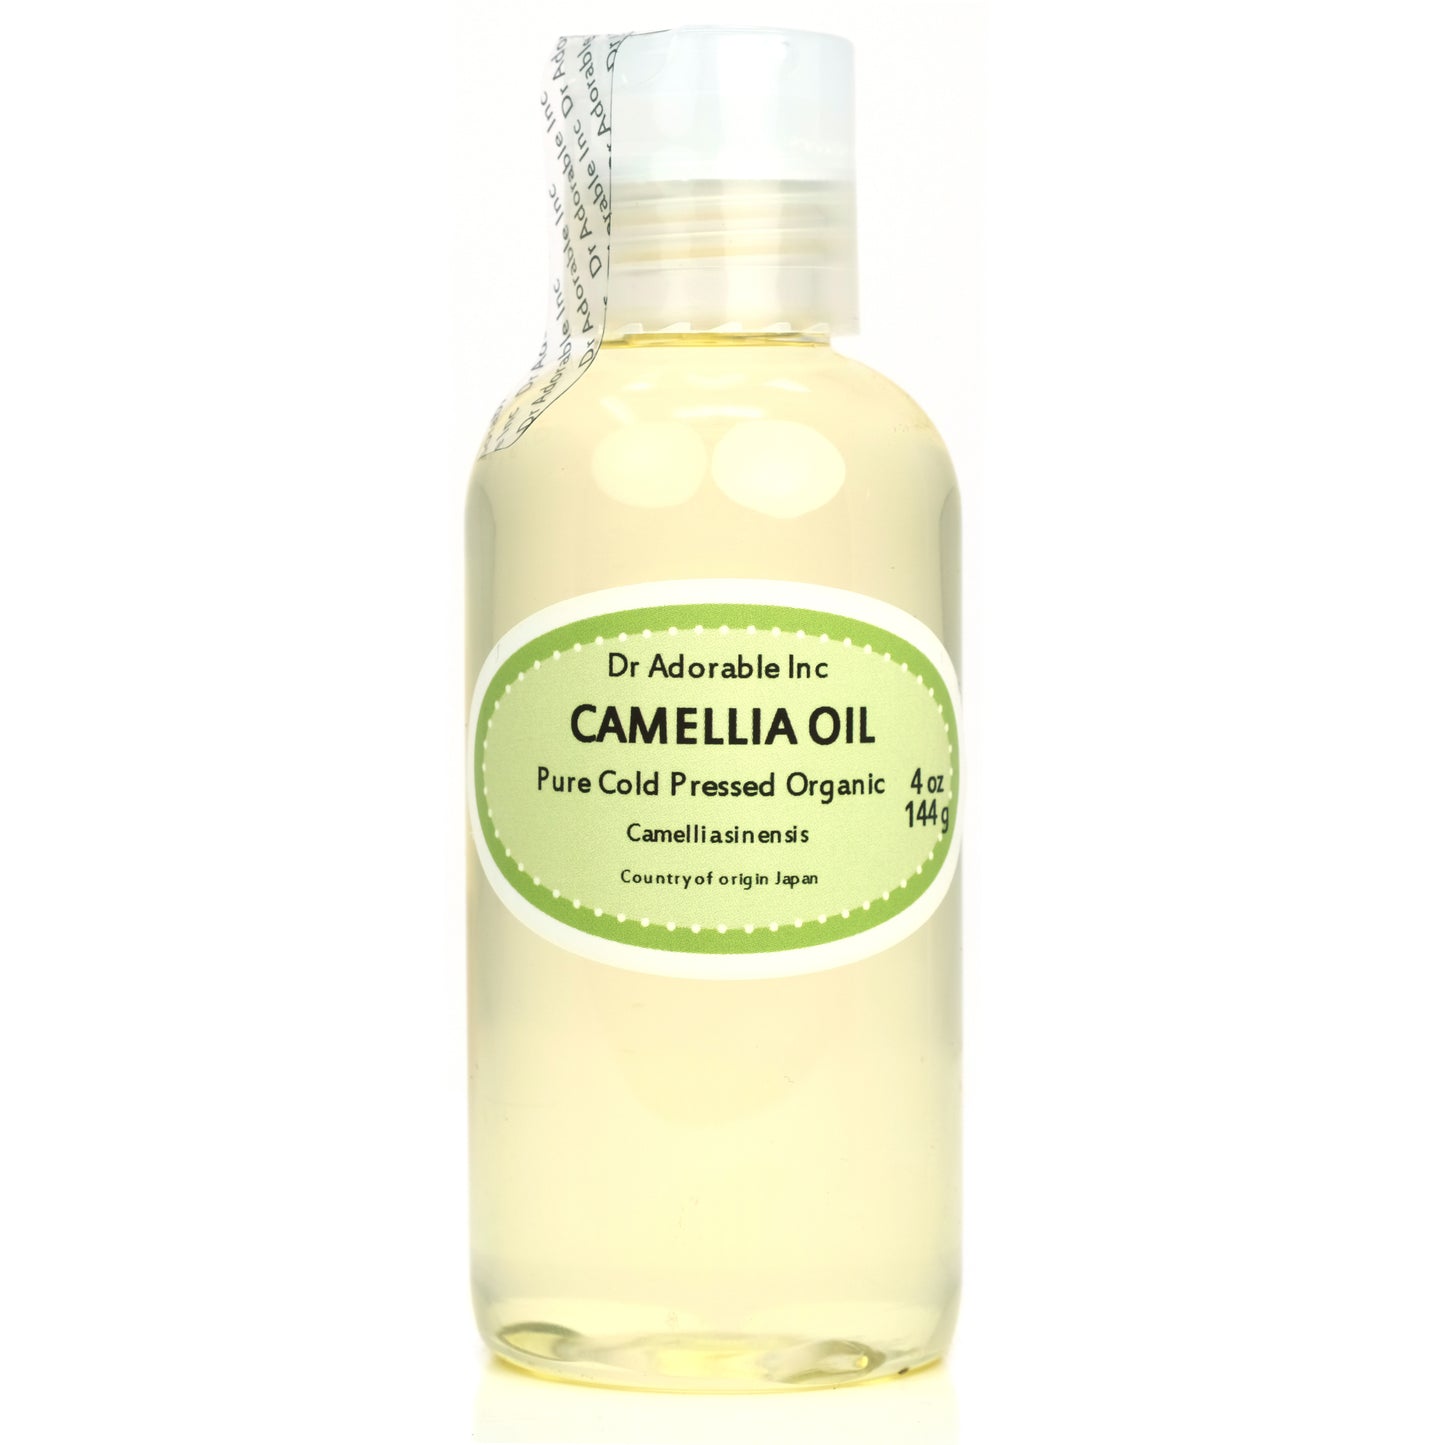 Camellia Seed Oil - 100% Pure Natural Organic Cold Pressed